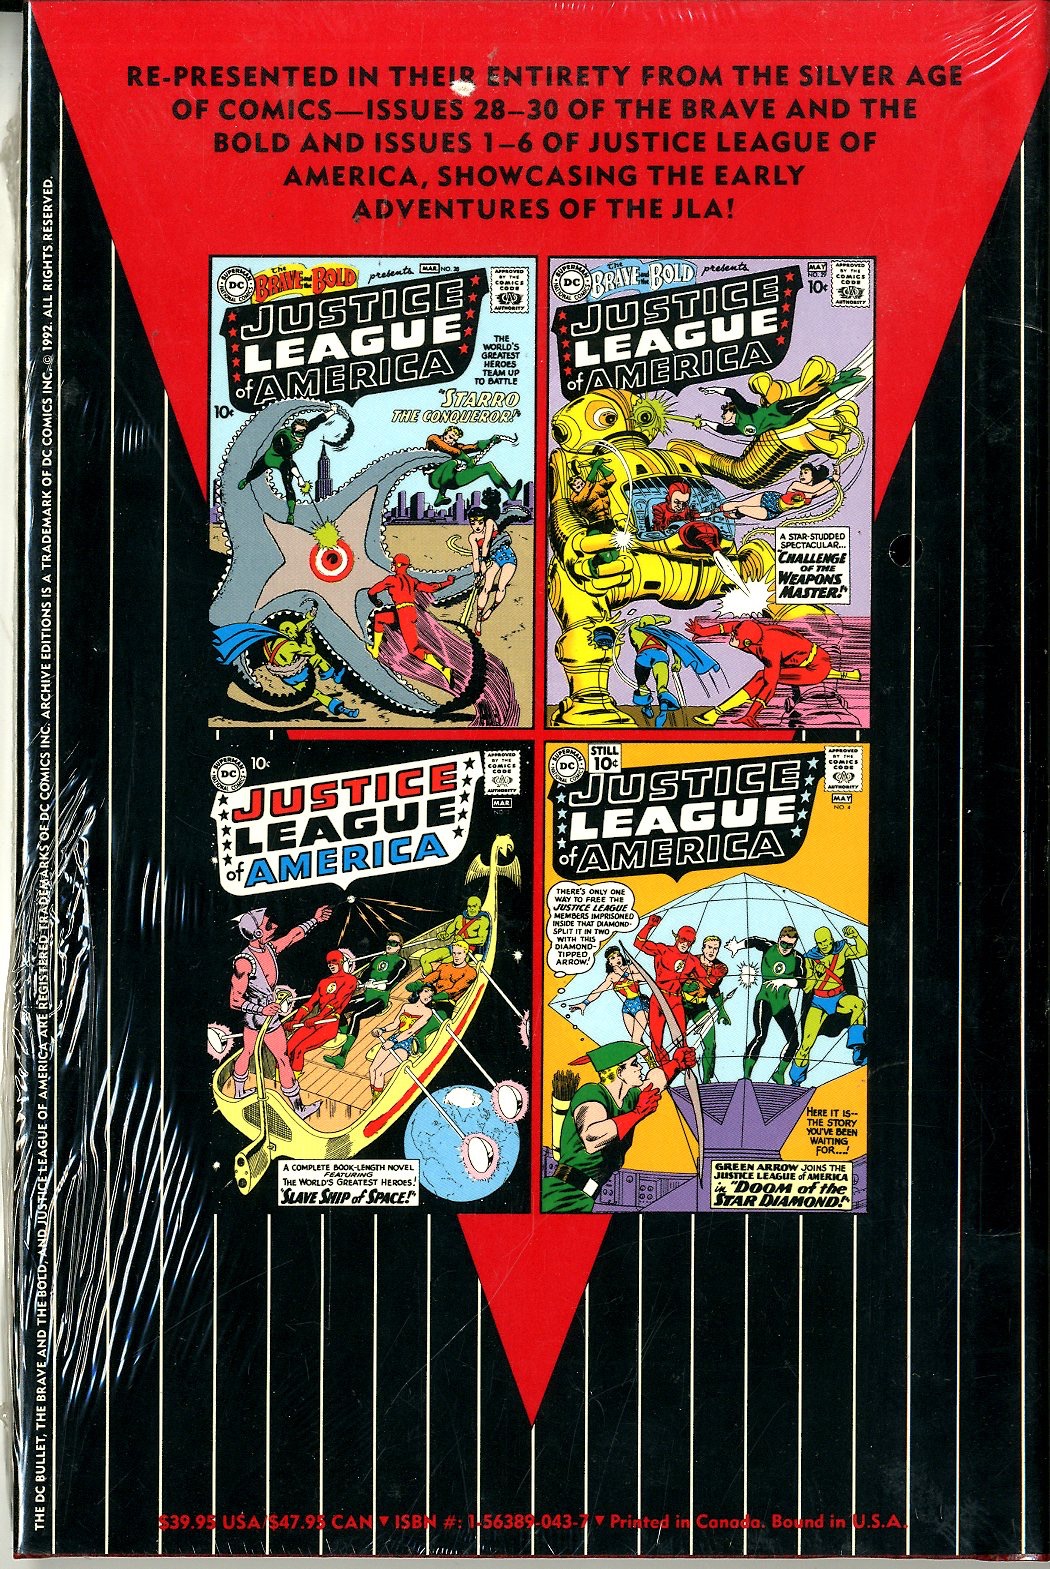 Archive Editions Justice League Of America - 11244